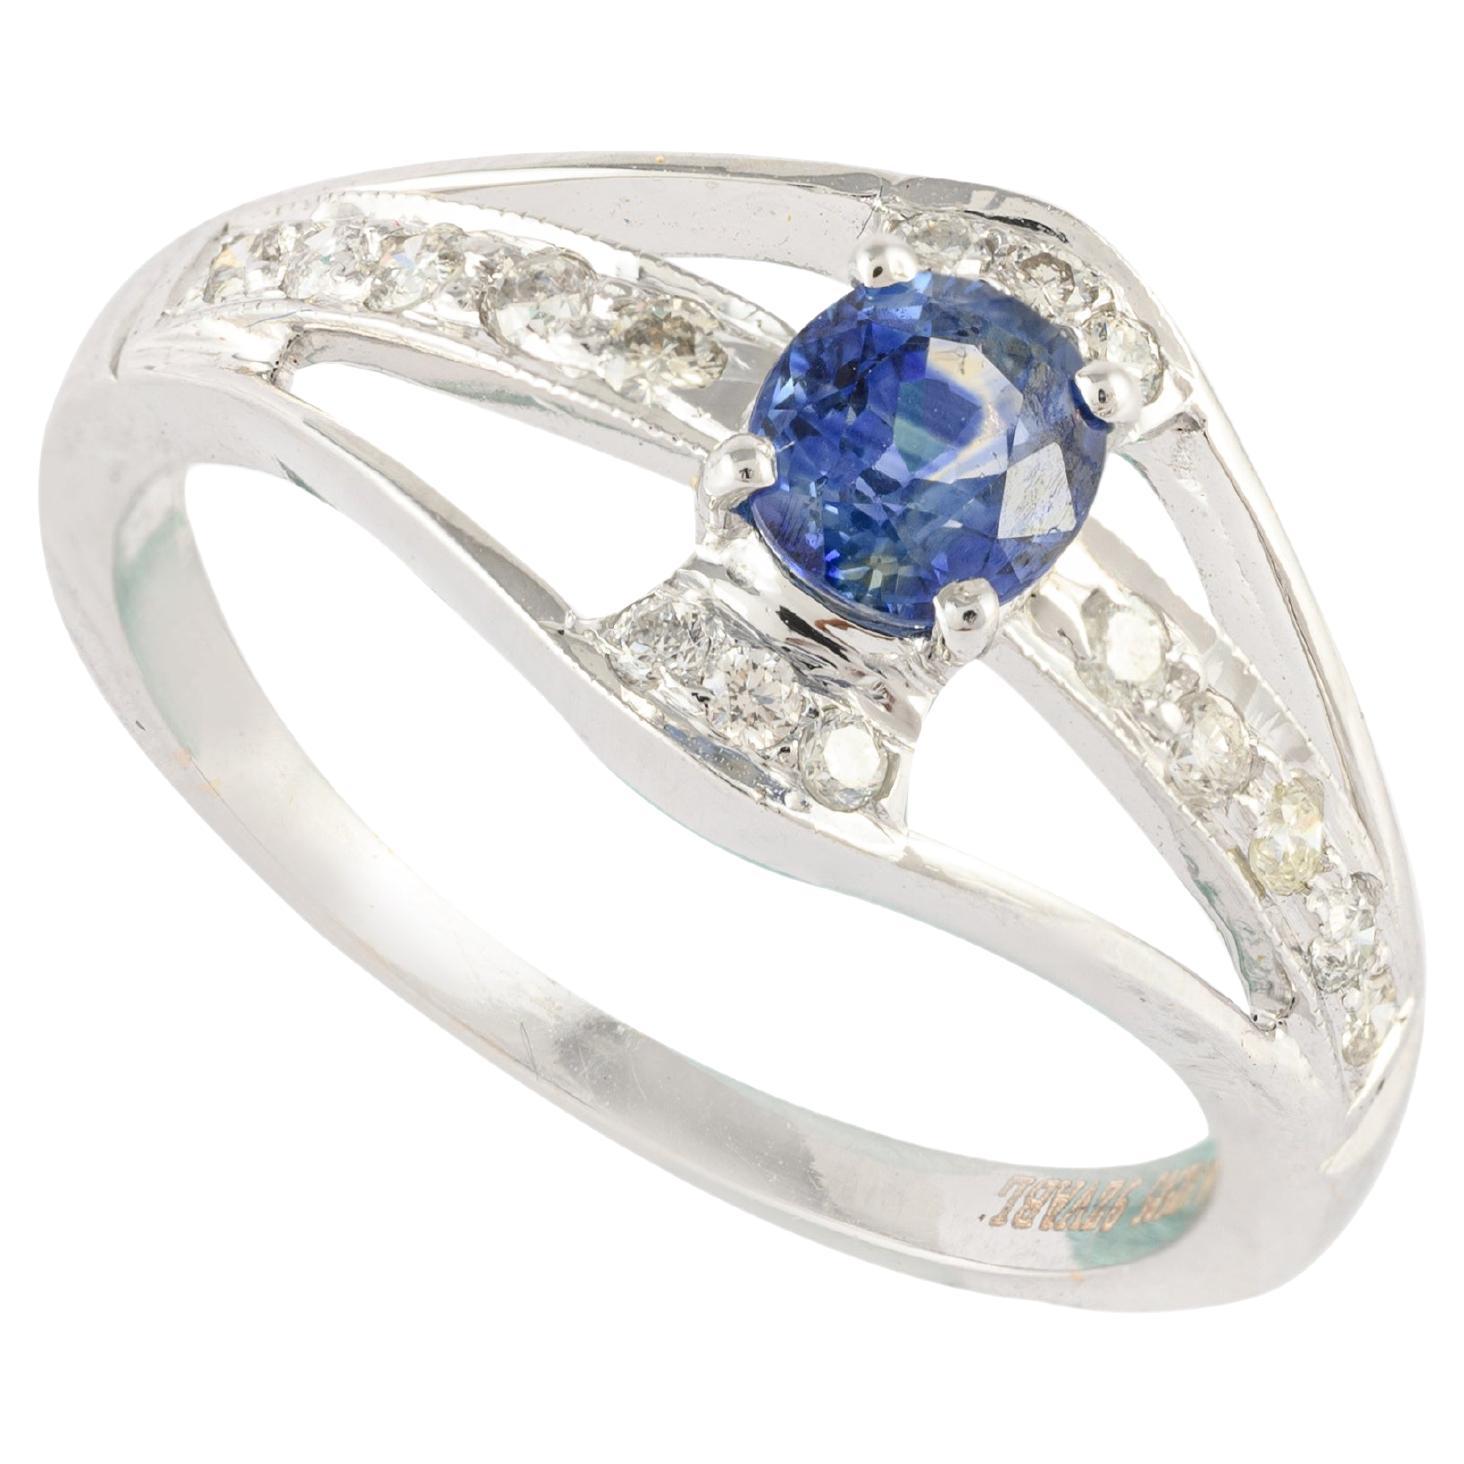 Elegant Diamond and Blue Sapphire Ring in 14k Solid White Gold 